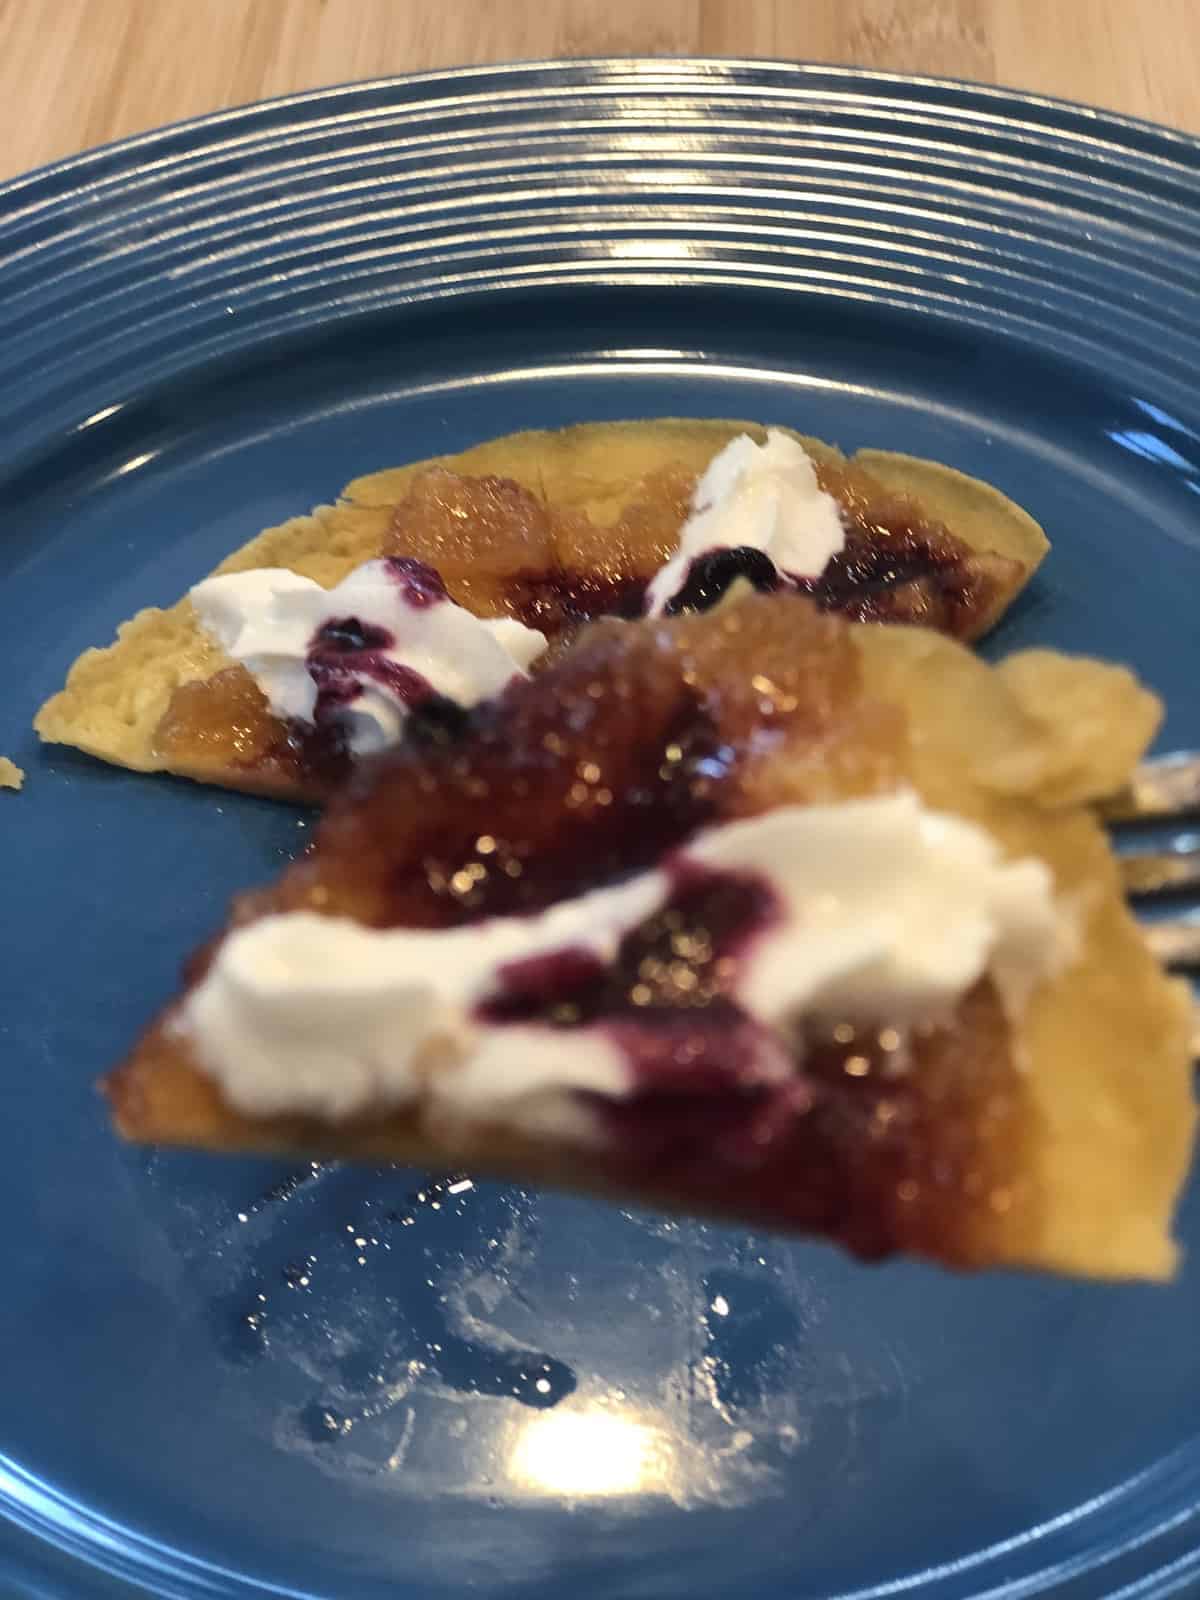 a bite of crepe with whipped cream and jelly on a fork over a blue plate